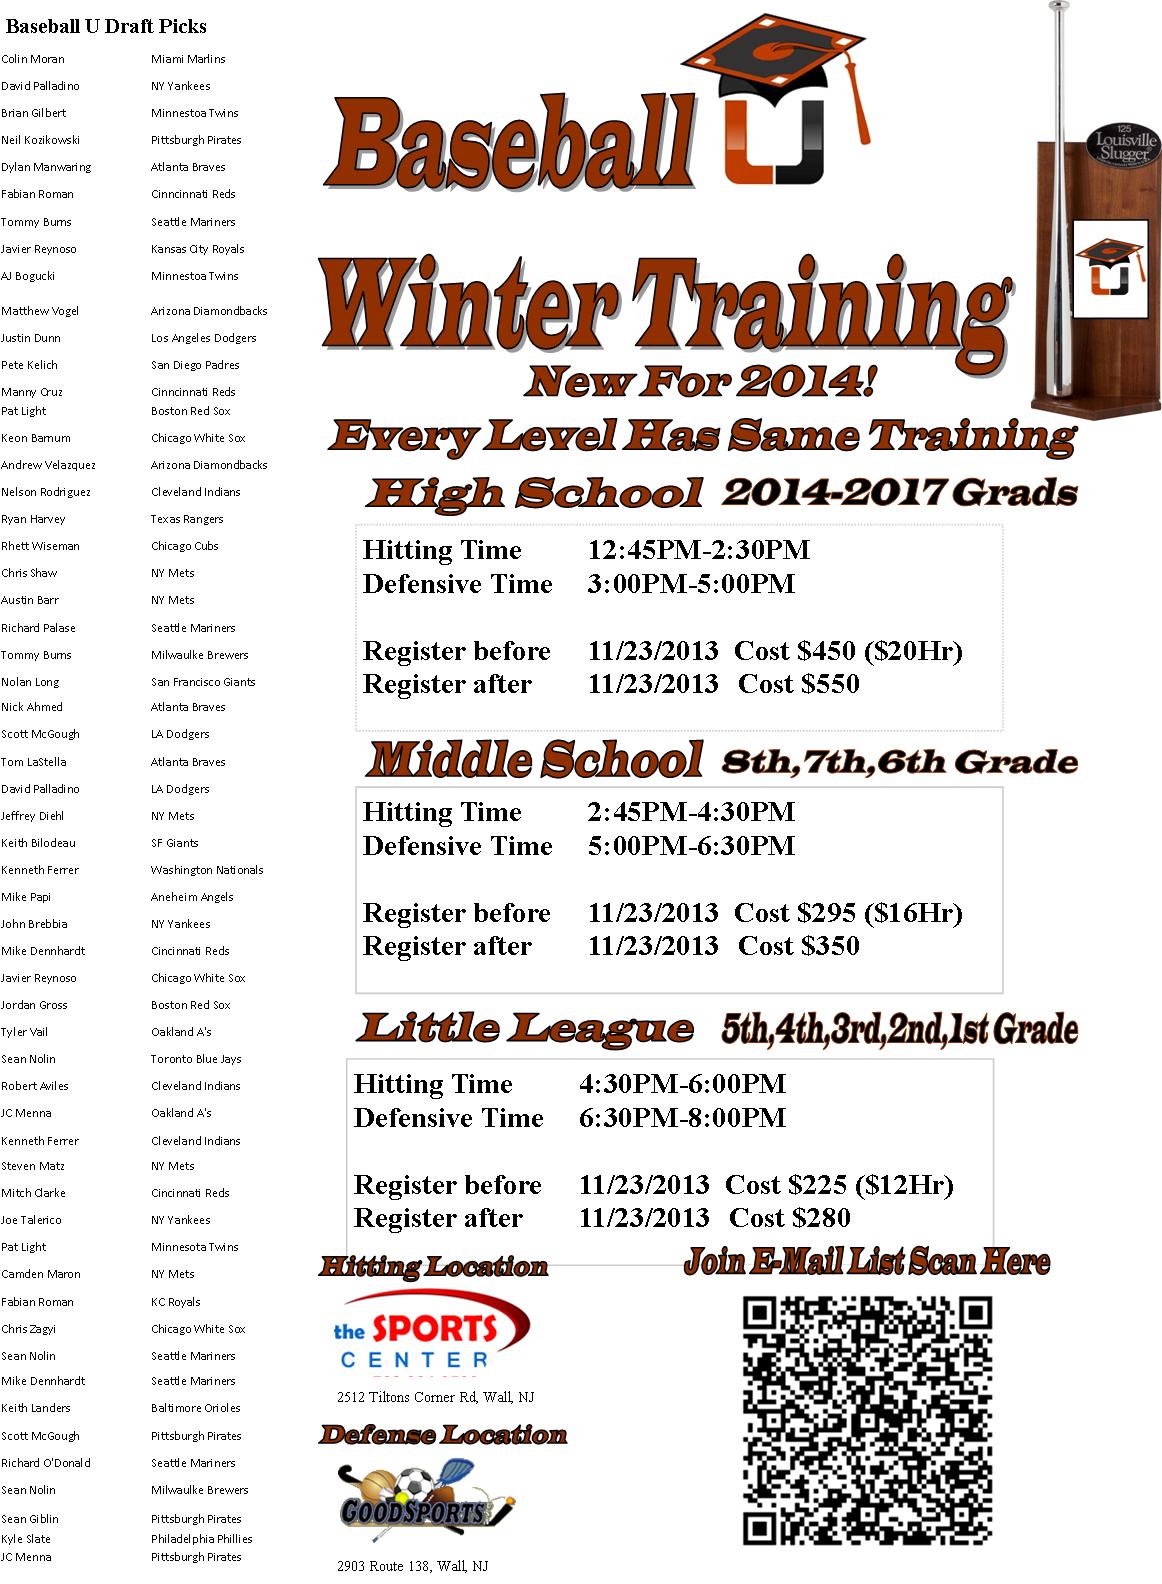 Baseball U Winter Workouts With Scan Picture.jpg